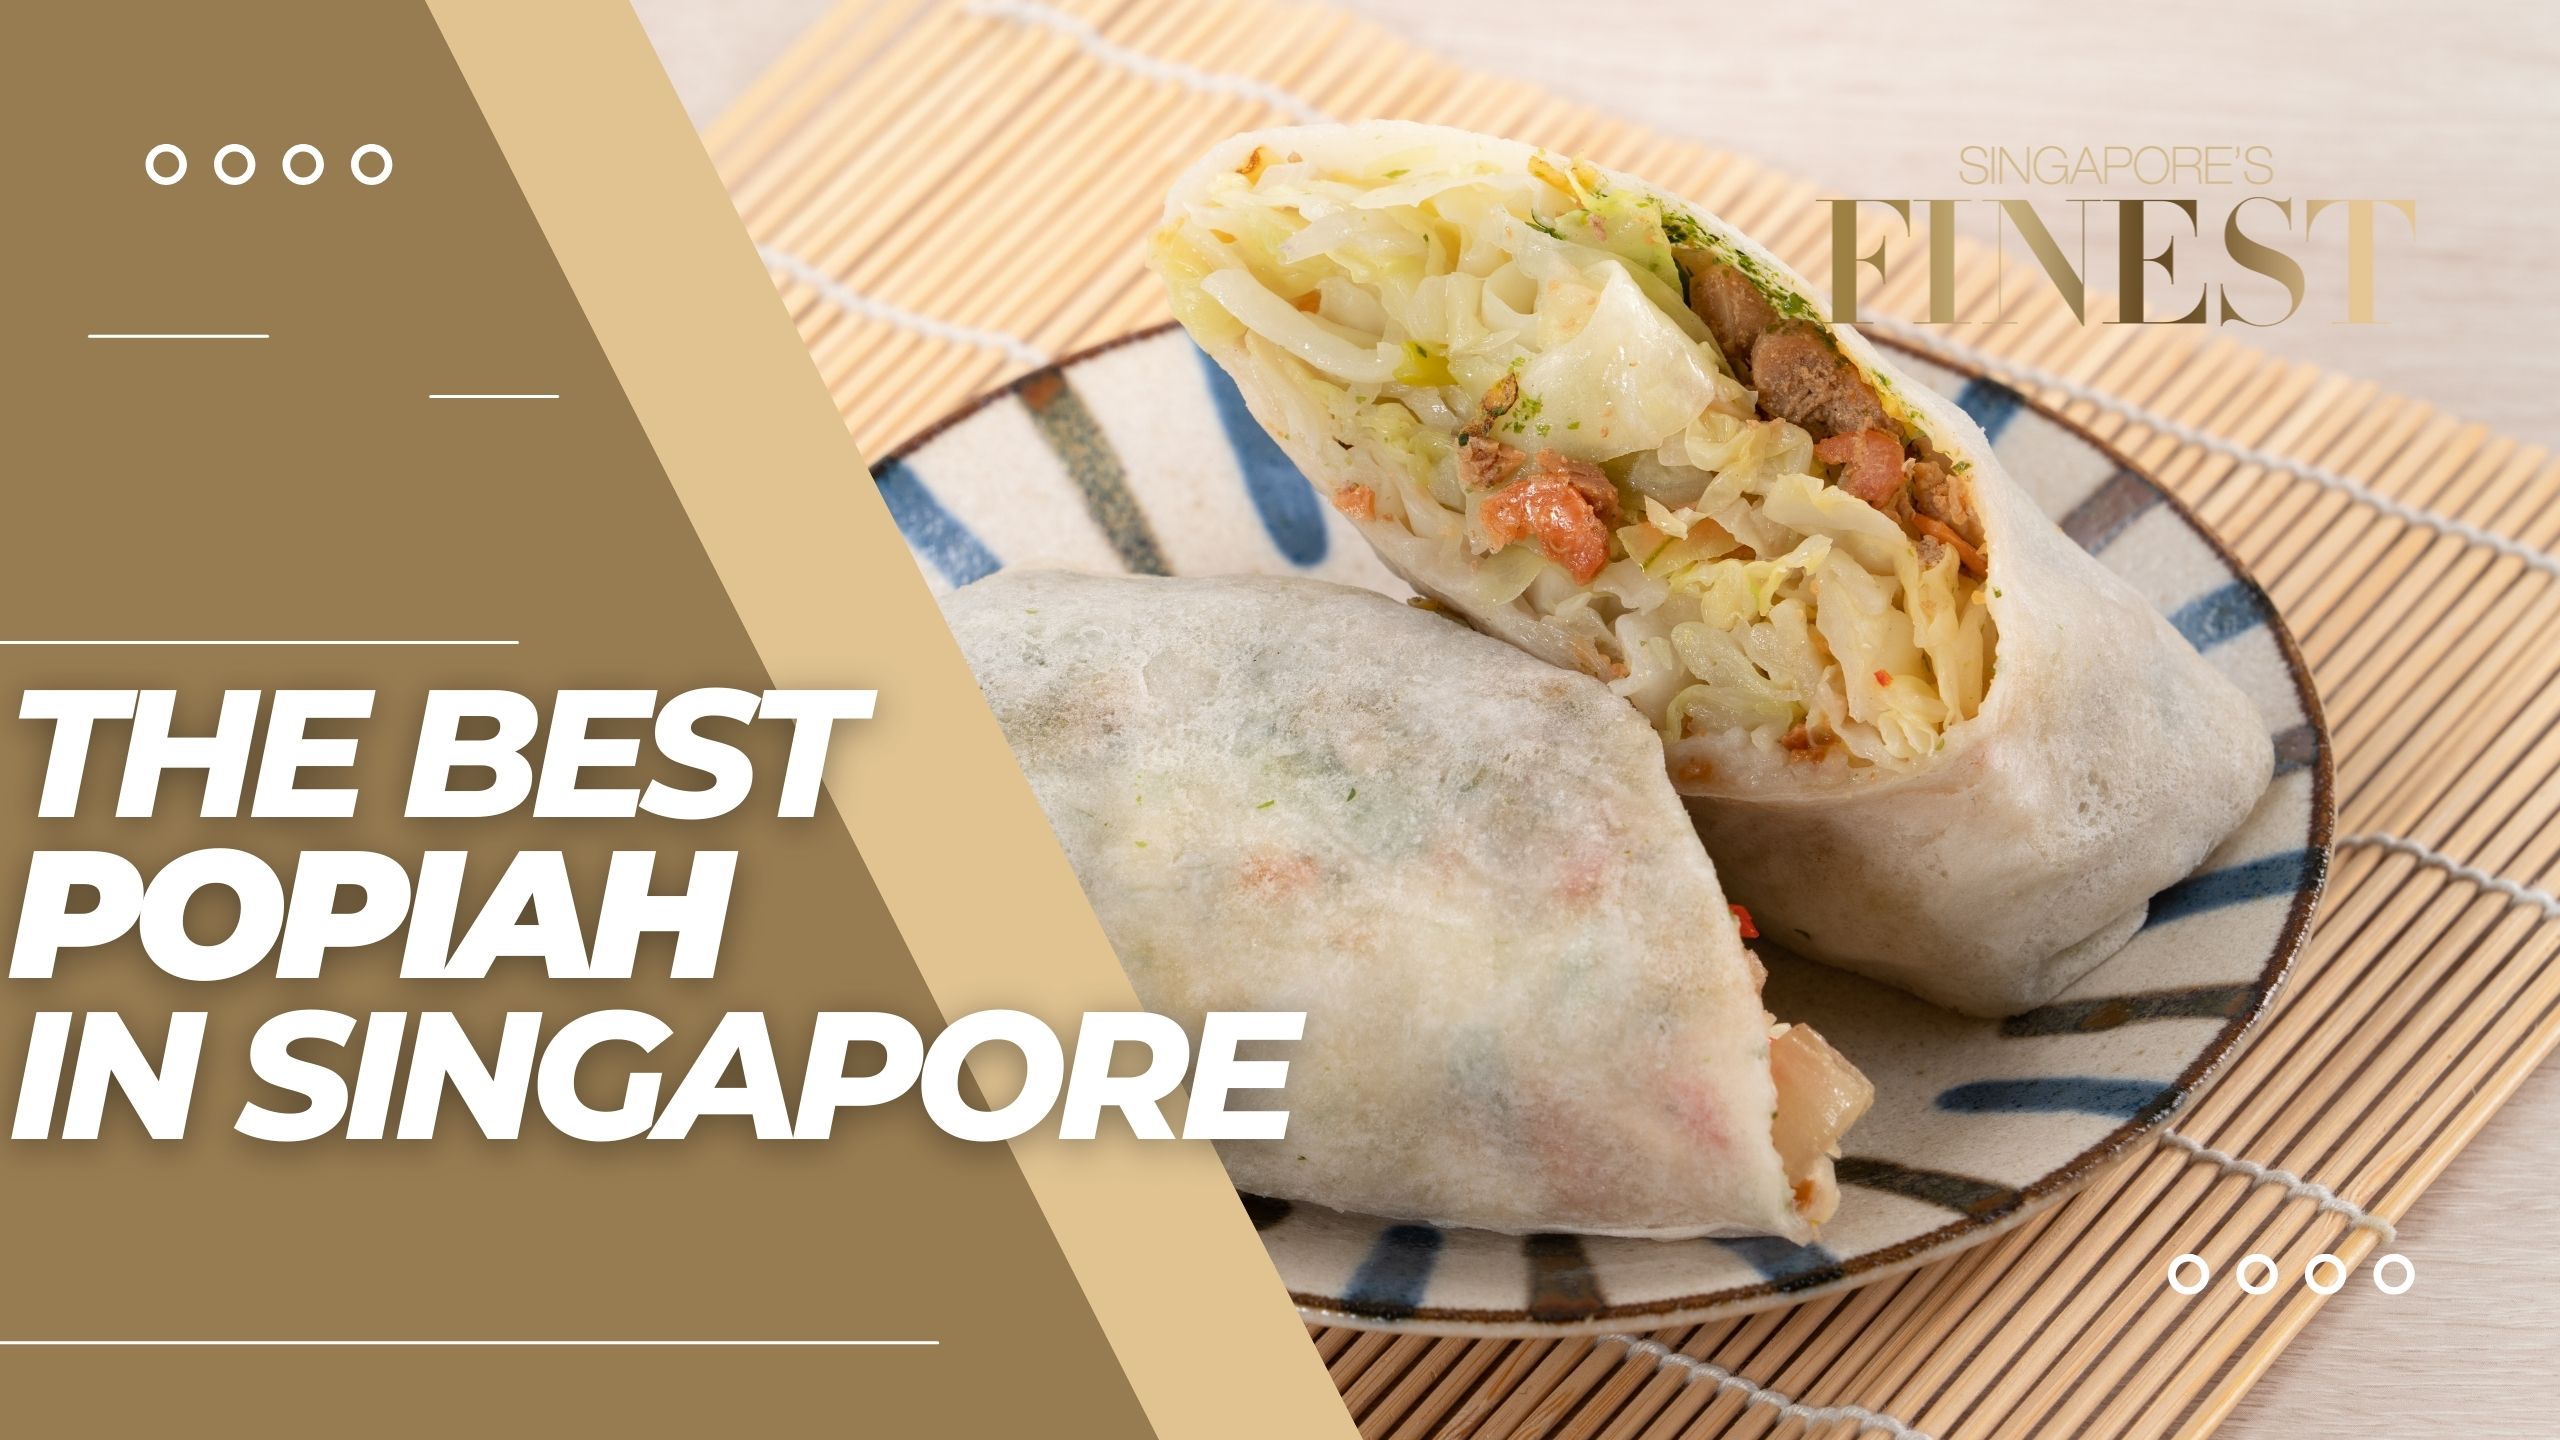 The Finest Popiah in Singapore